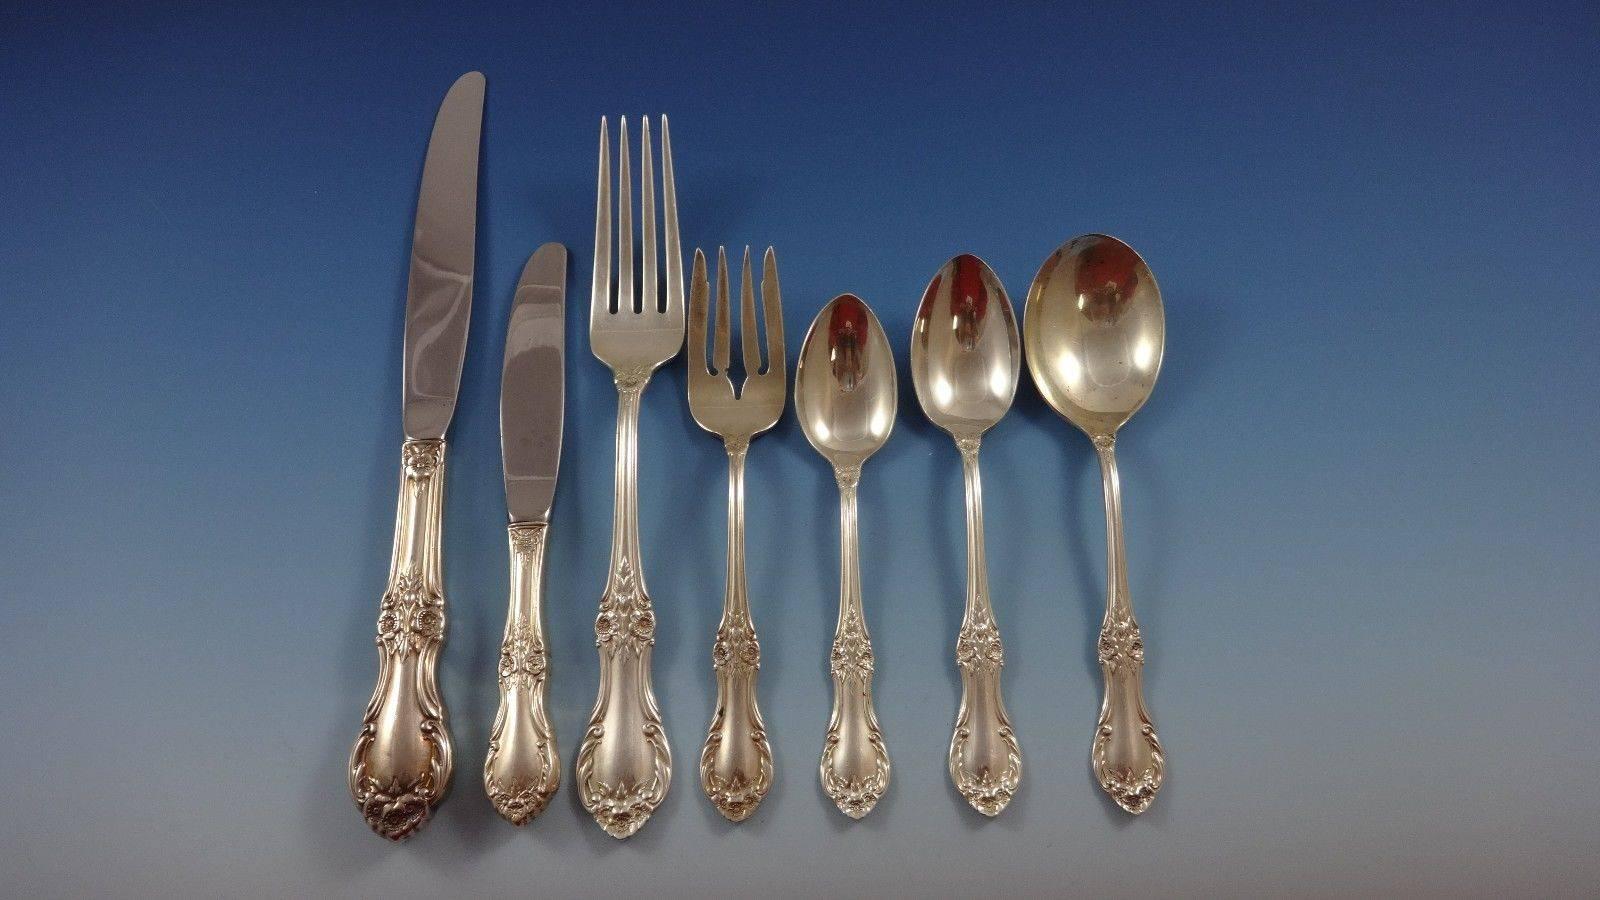 Wild Rose by International Sterling Silver Flatware Set of 95 Pieces includes: 12 Knives 9 1/8", 12 Dinner Forks 7 3/4", 12 Salad Forks 6", 12 Teaspoons 5 7/8", 12 Cream Soup Spoons 6", 12 Hollow Handle Butter Spreaders 6